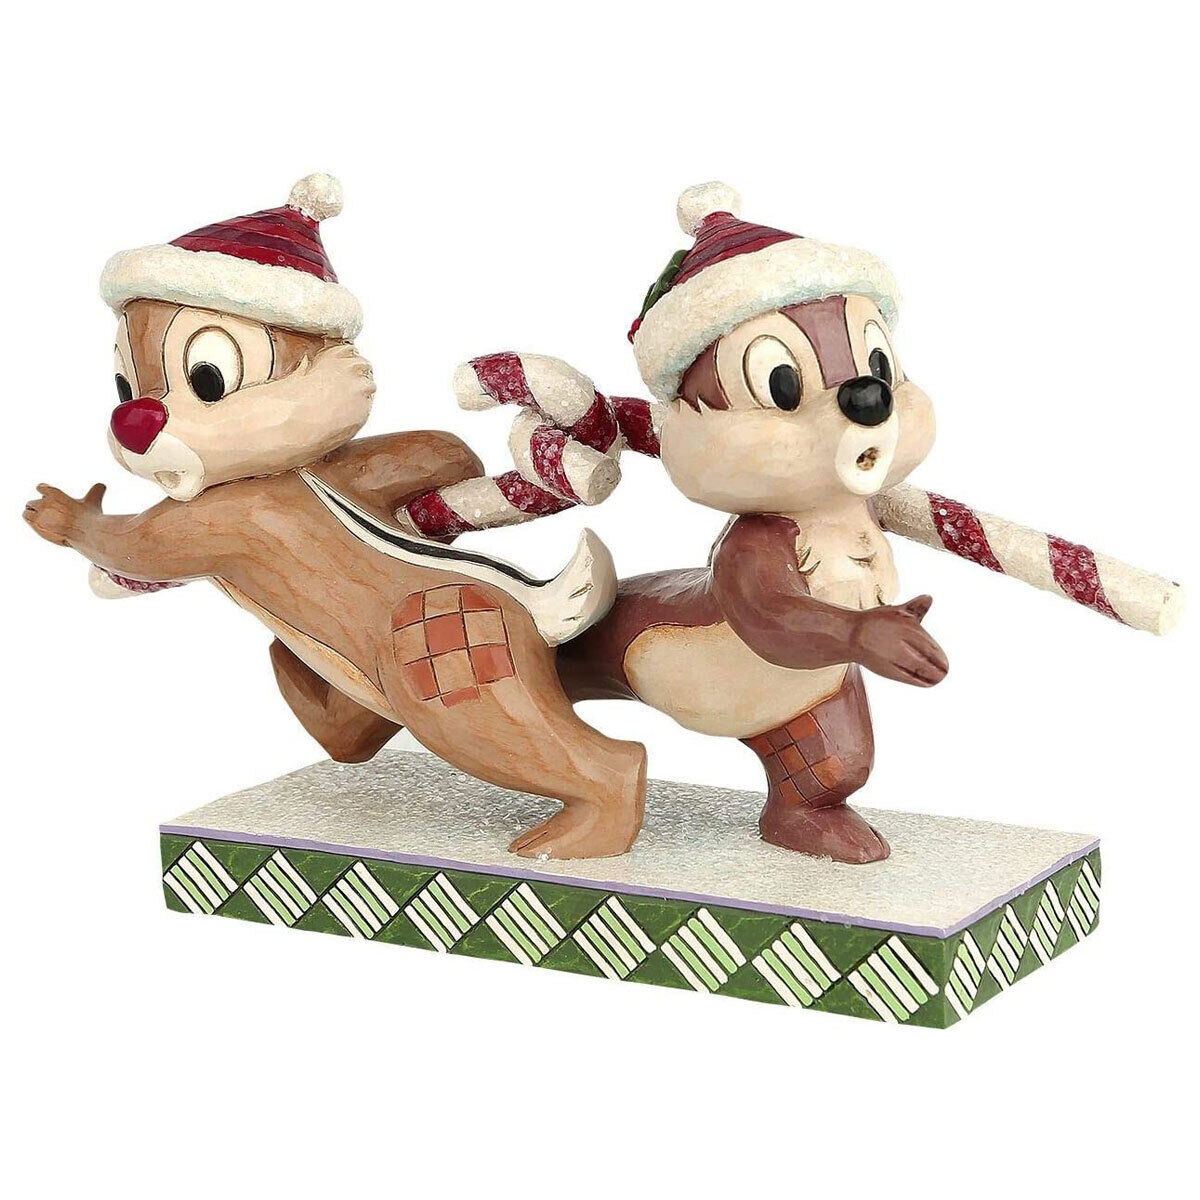 Disney Traditions Figurine - Chip 'n' Dale Candy Cane Caper - Limited Edition